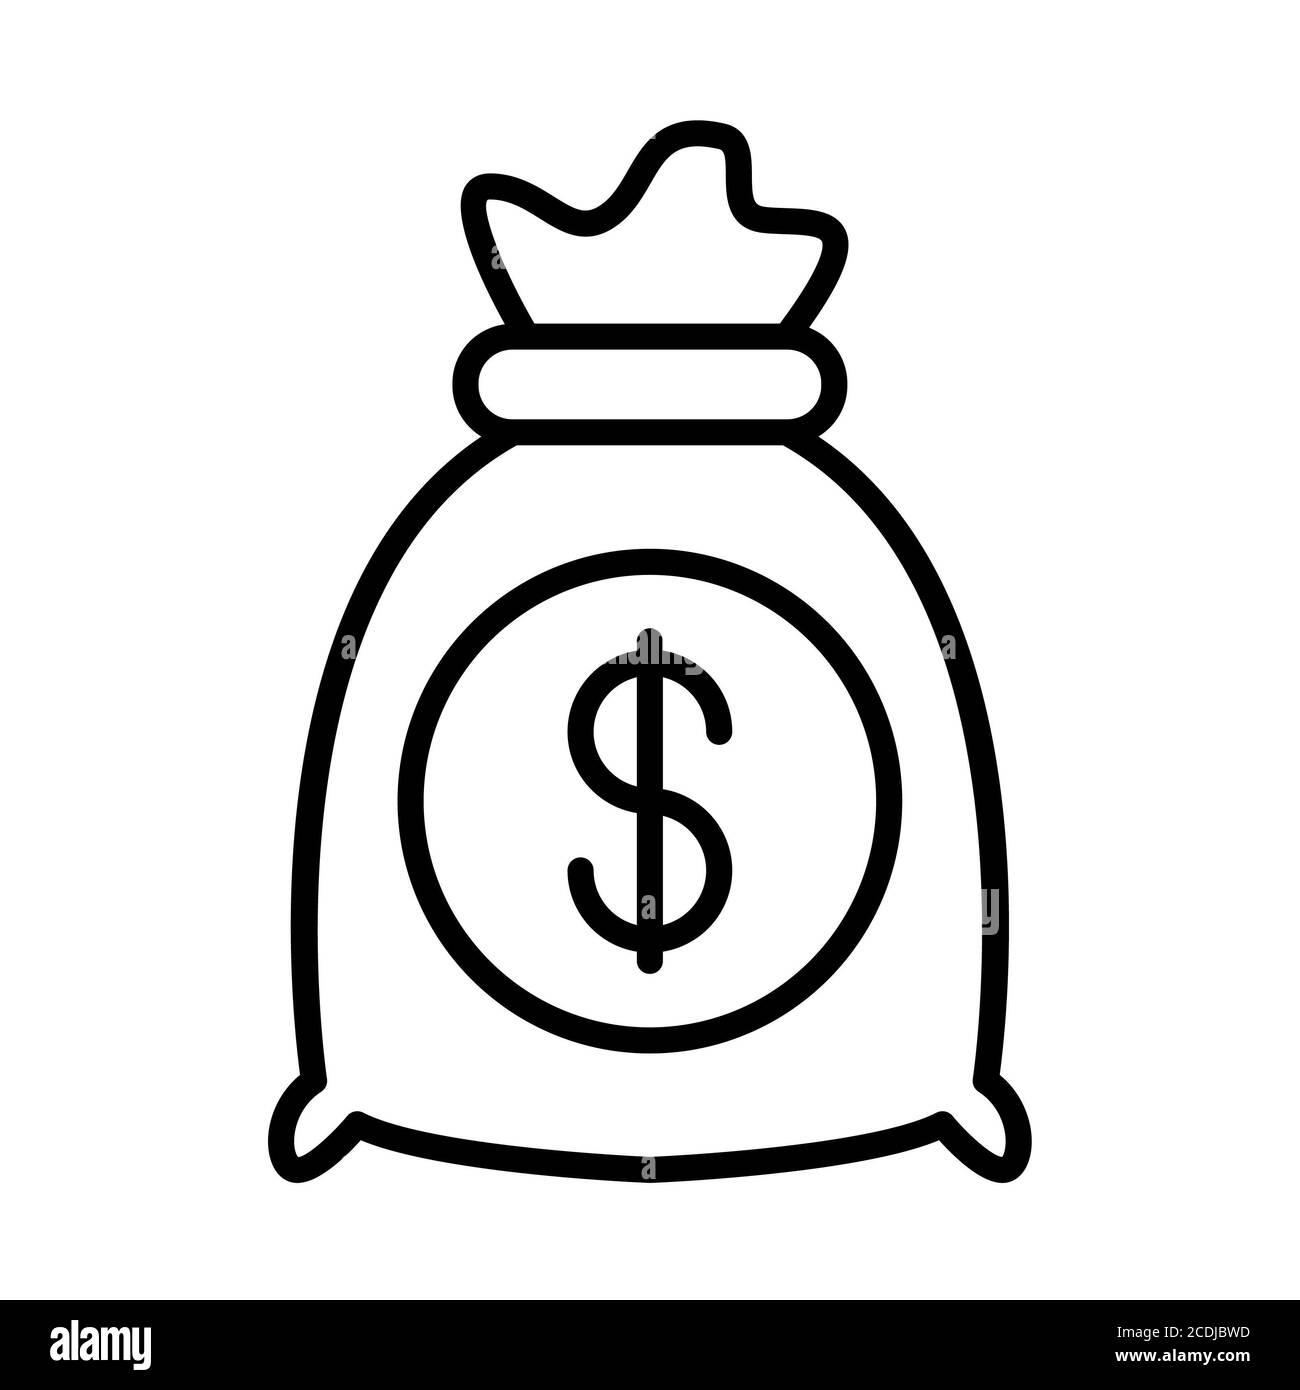 Money Bags Banking Line Icons Stock Photo